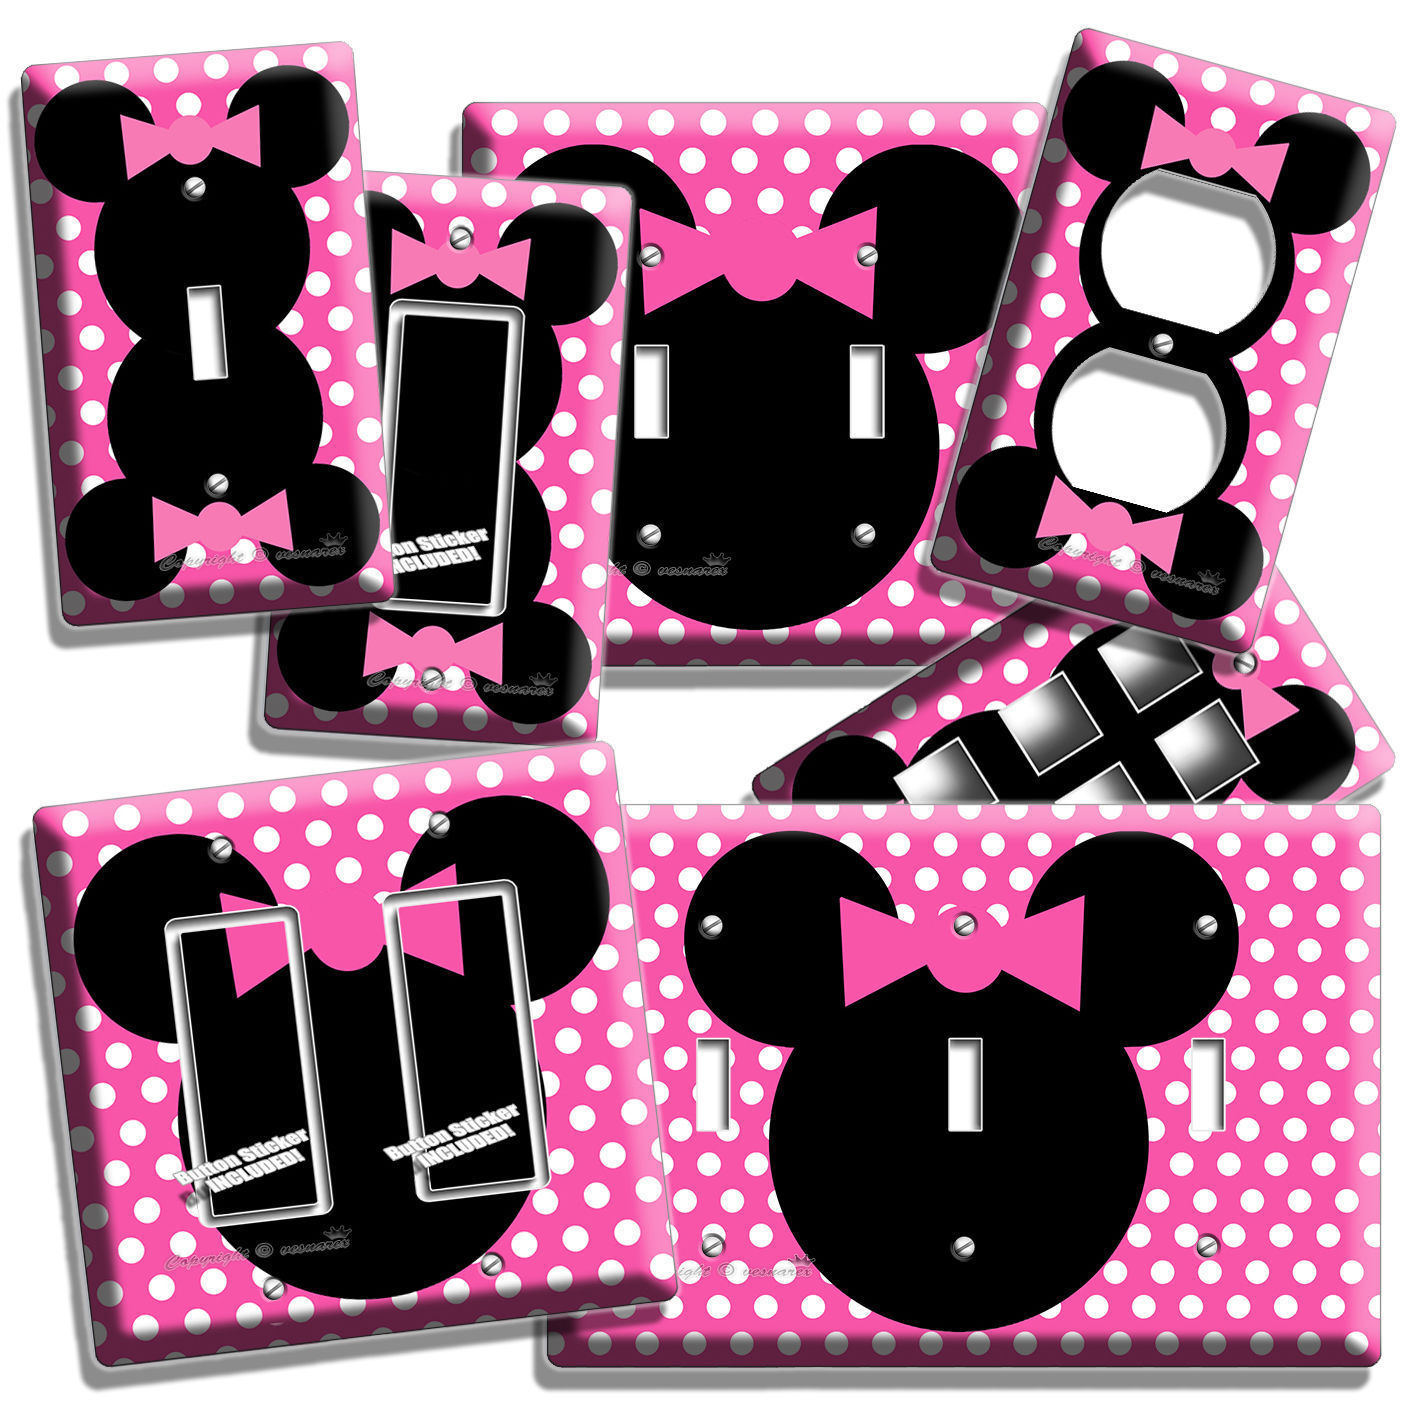 MINNIE MOUSE EARS PINK POLKA DOTS GIRLS BEDROOM LIGHT SWITCH OUTLET WALL PLATE